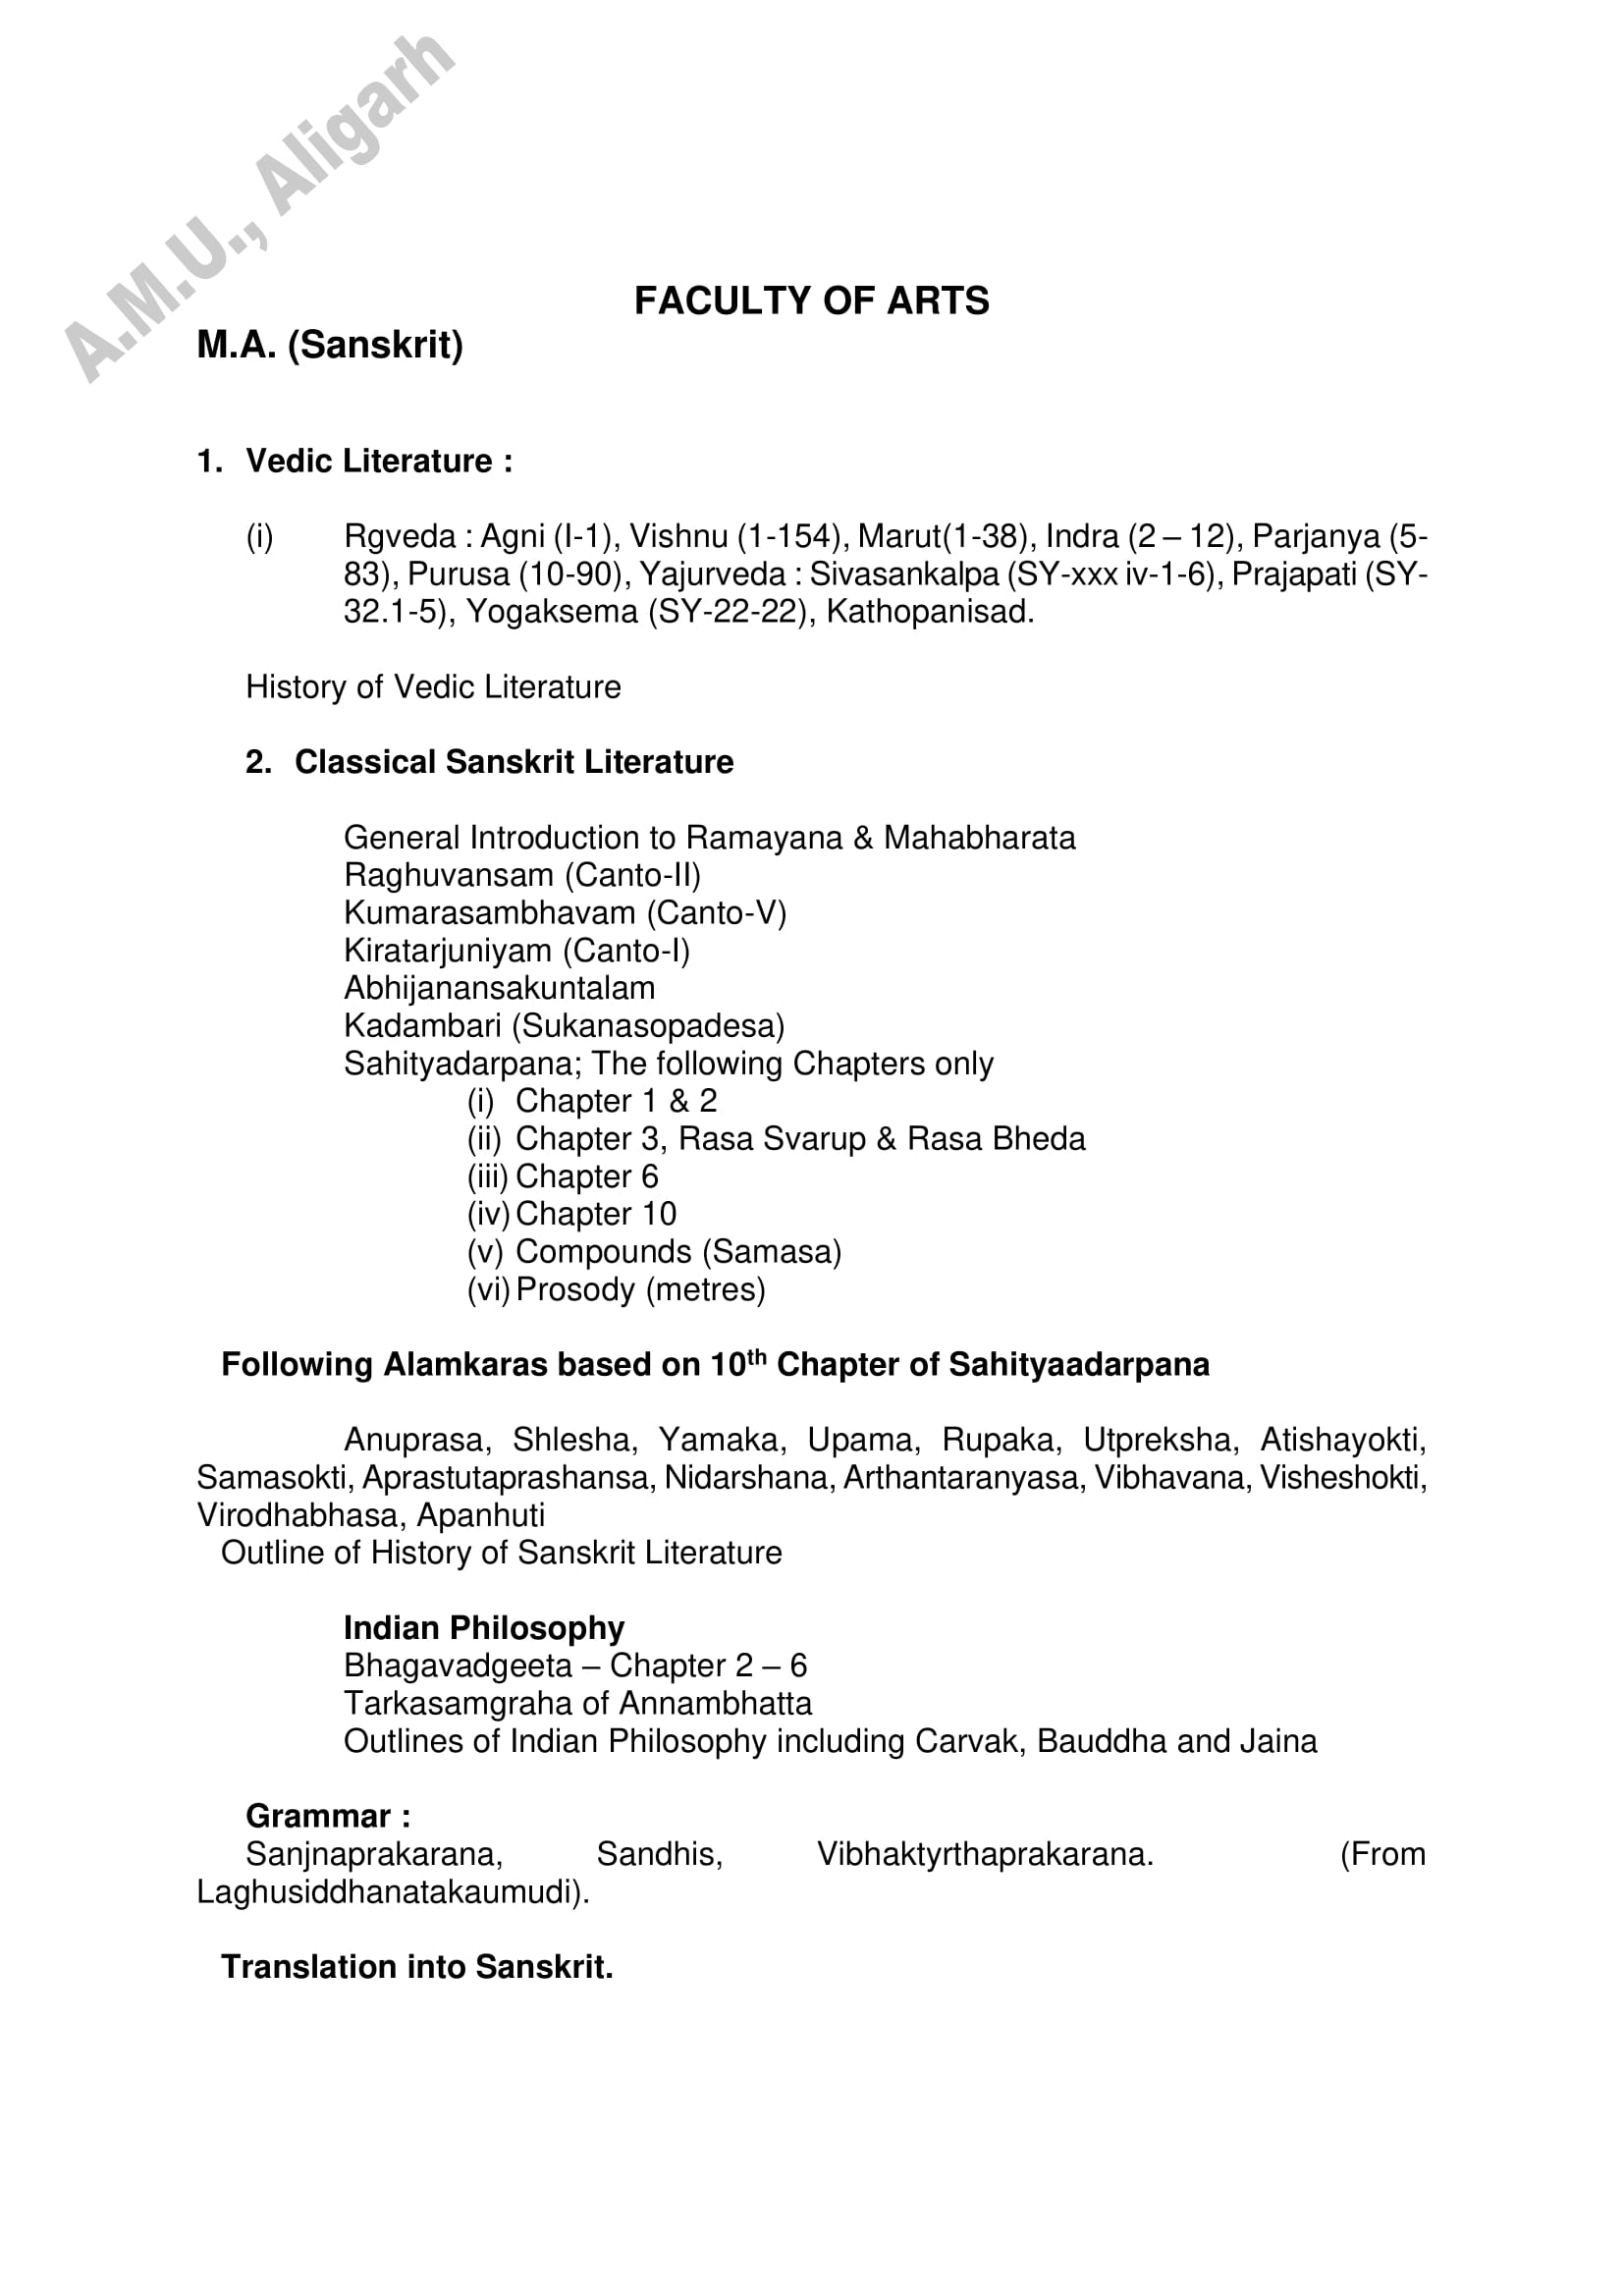 AMU Entrance Exam Syllabus for M.A. in Sanskrit - Page 1